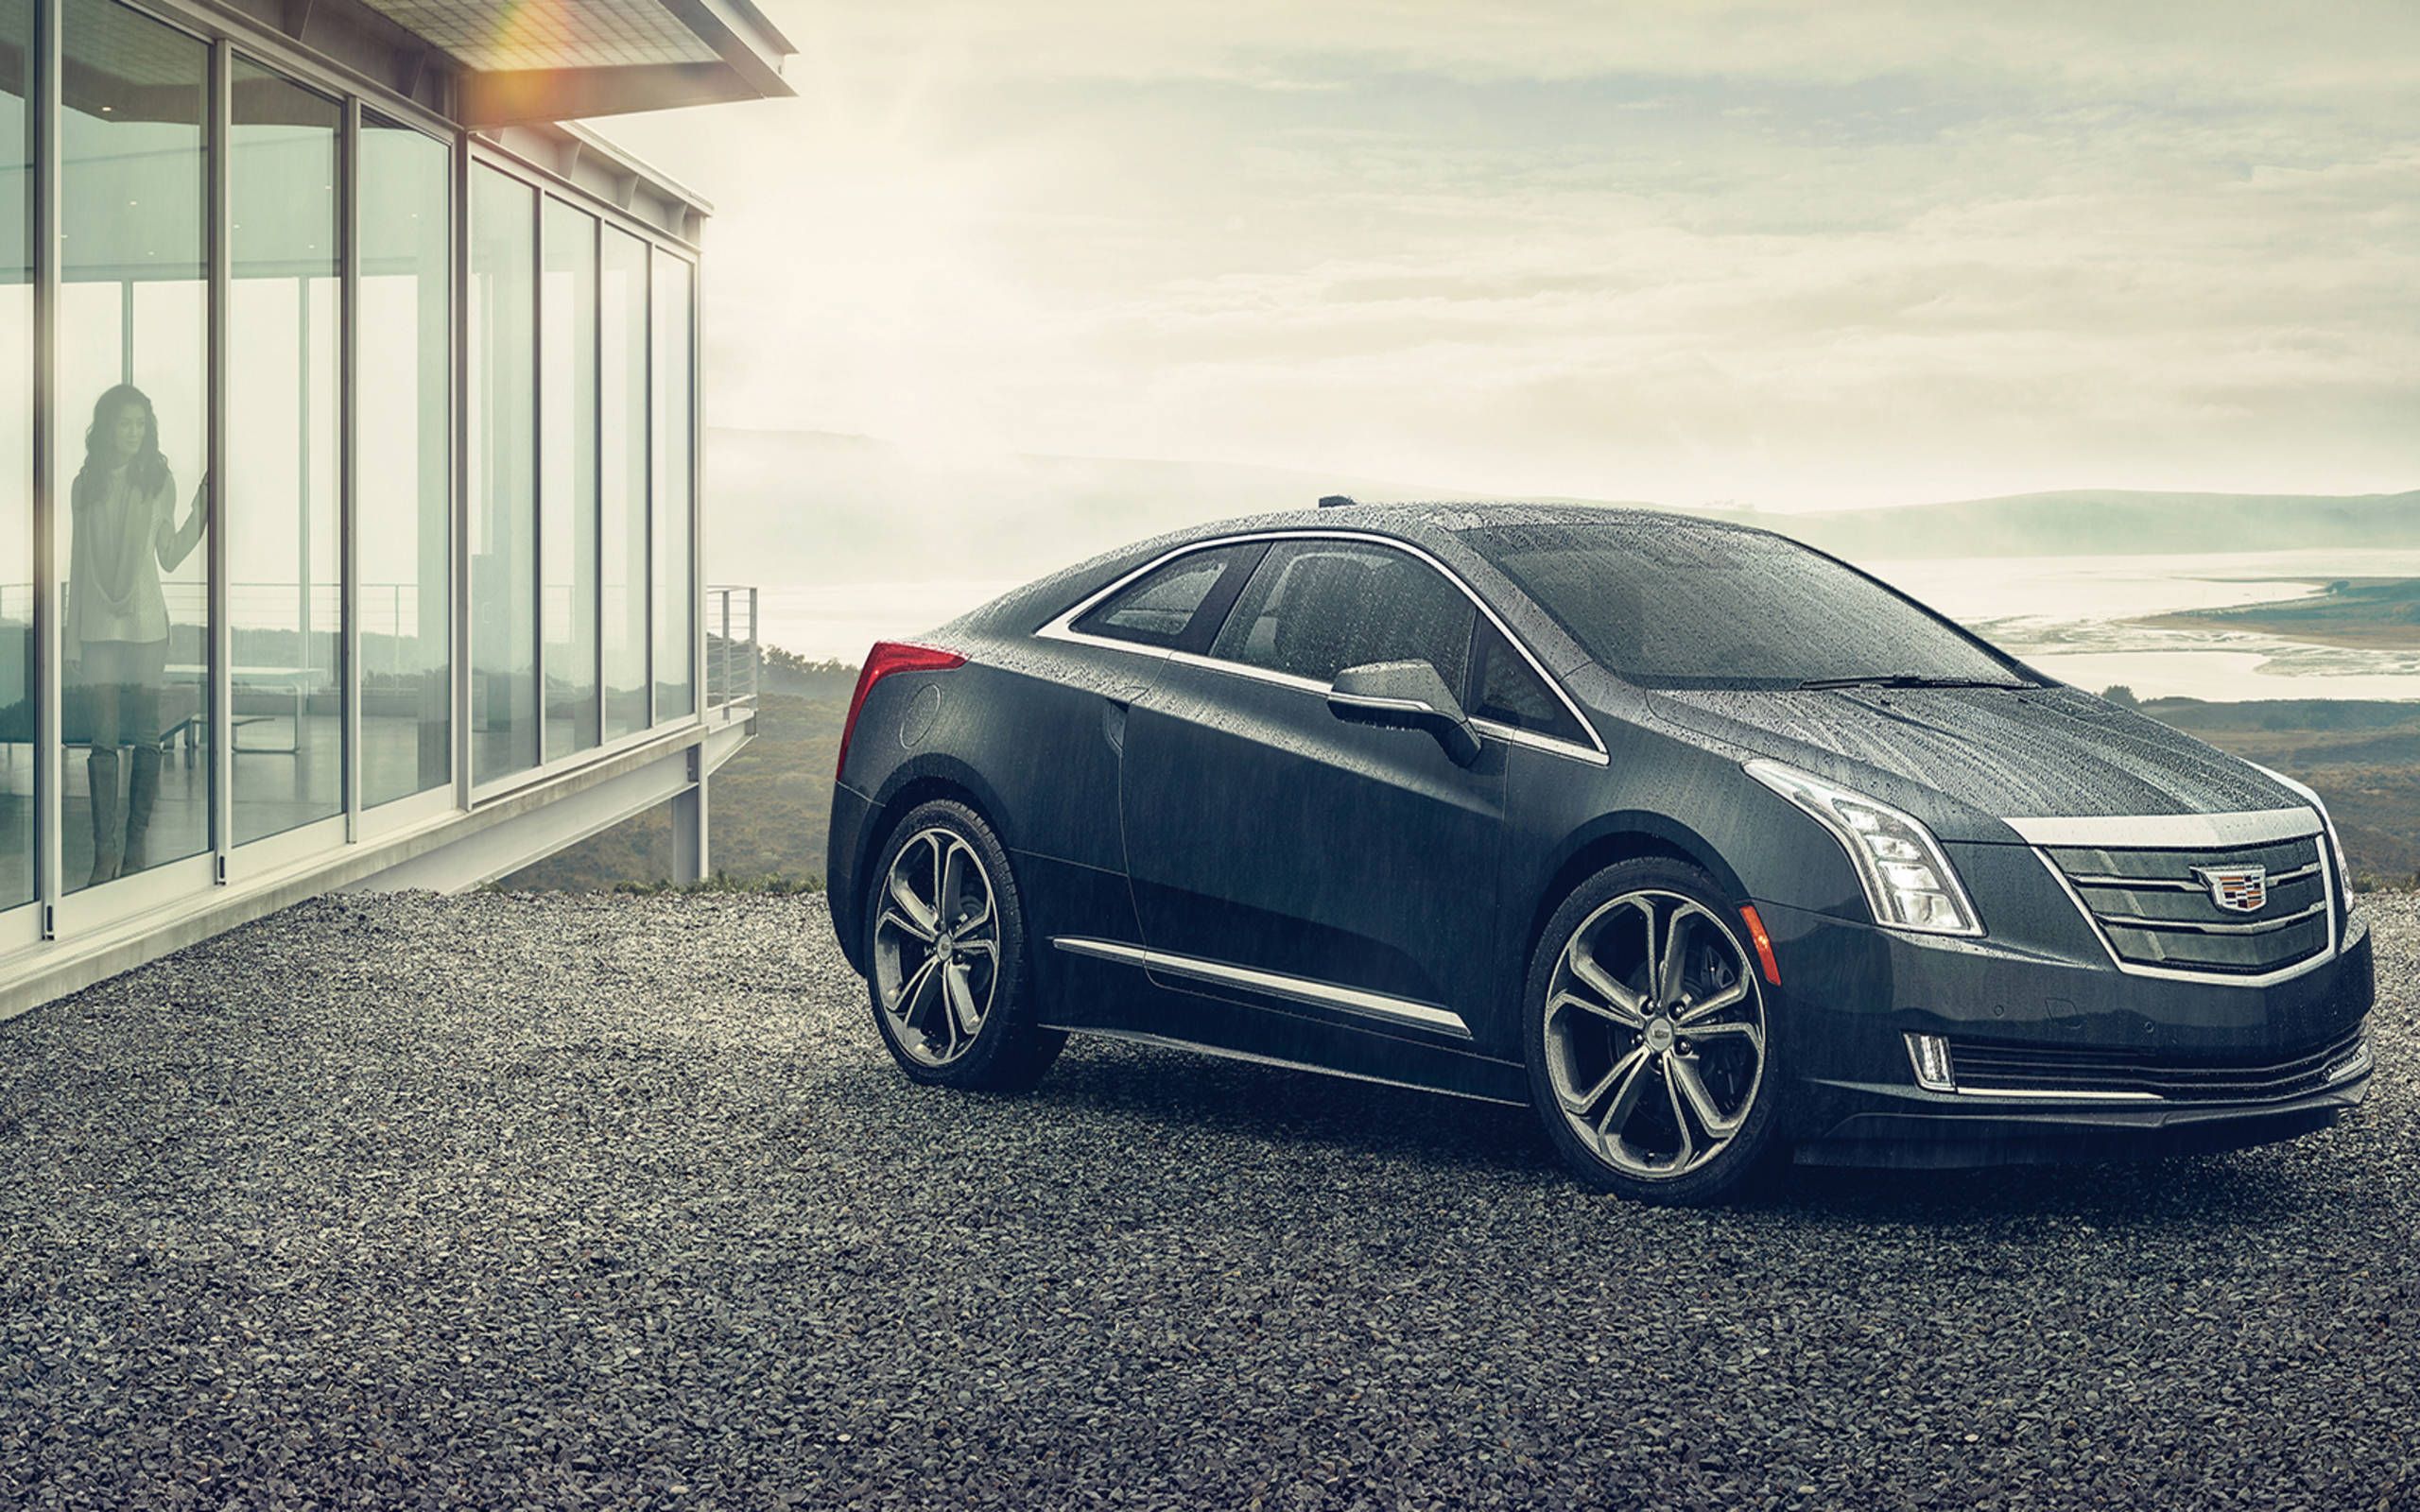 The Cadillac ELR is not long for this world